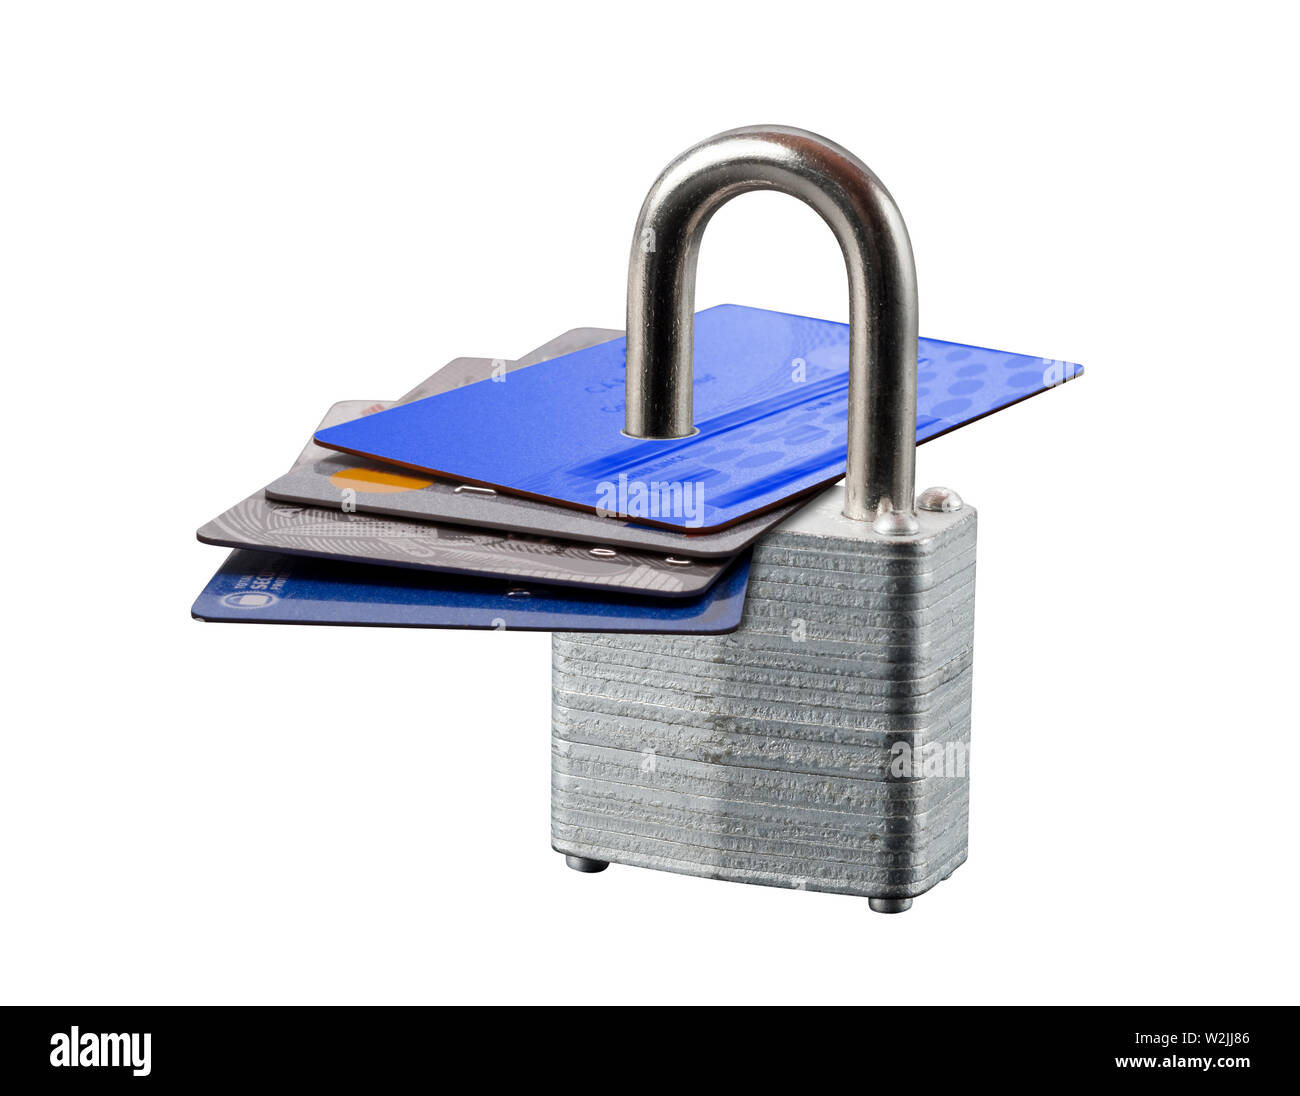 Save Download Preview A bunch of credit cards secured with a padlock as a metaphor for safety Stock Photo